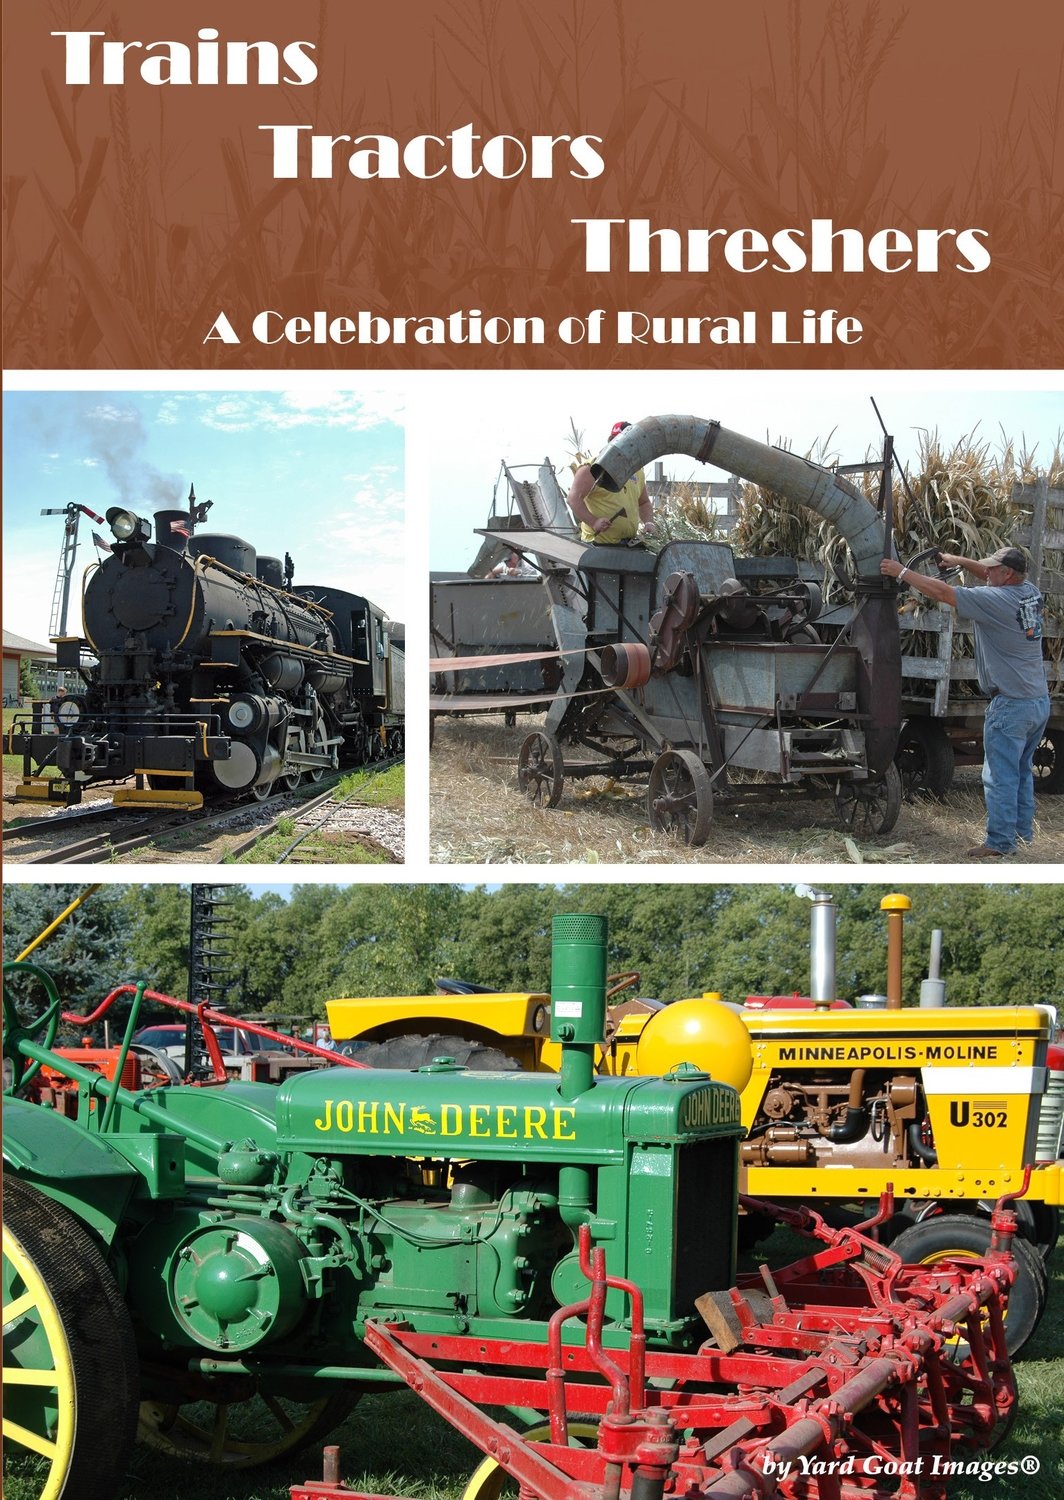 Trains Tractors Threshers - A Celebration of Rural Life